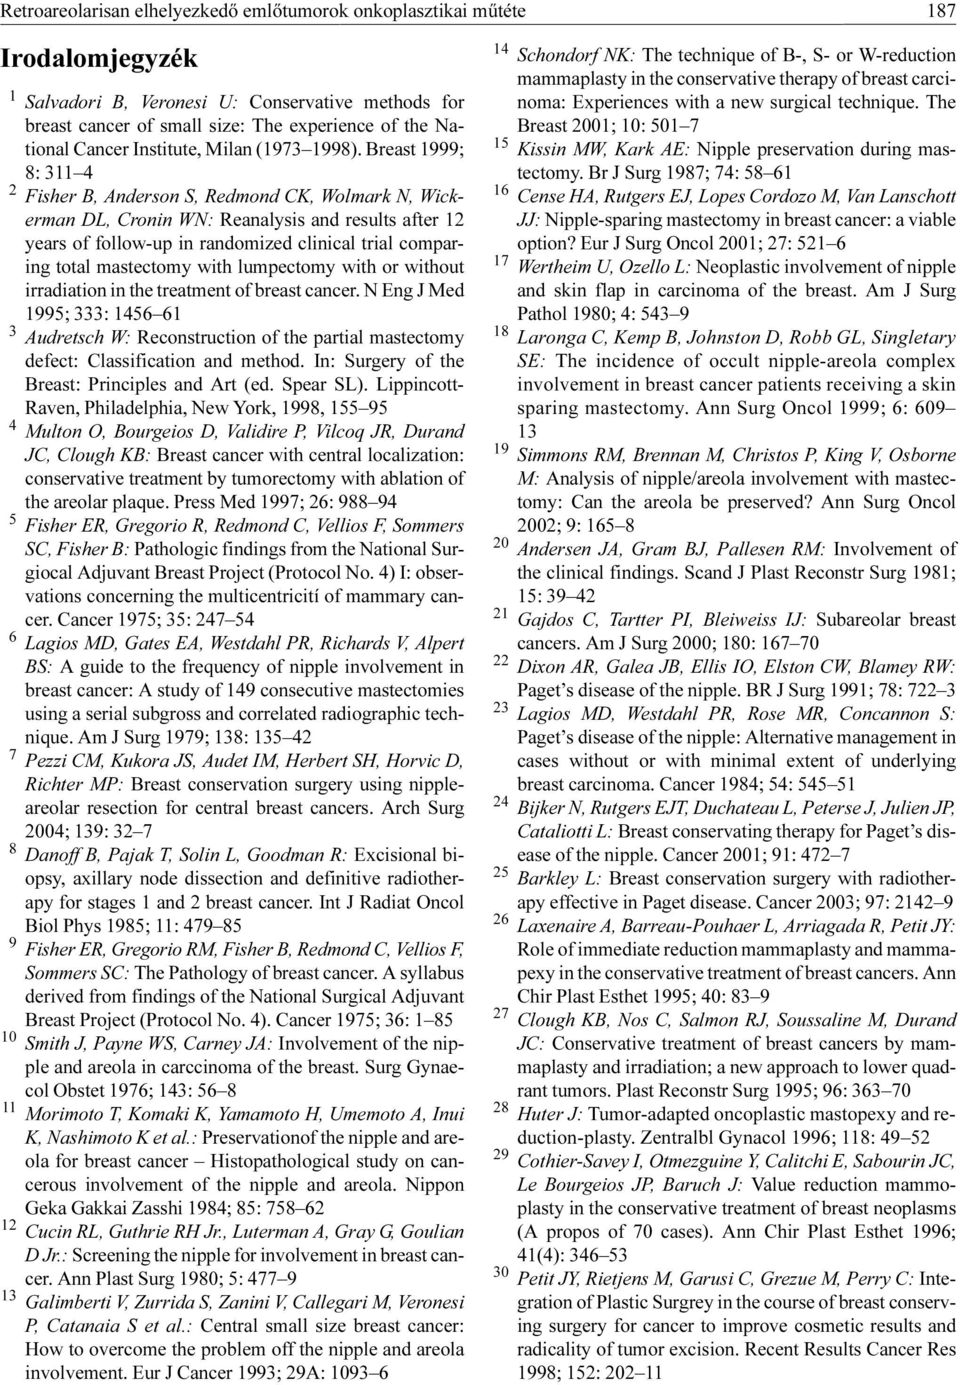 Breast 1999; 8: 311 4 2 Fisher B, Anderson S, Redmond CK, Wolmark N, Wickerman DL, Cronin WN: Reanalysis and results after 12 years of follow-up in randomized clinical trial comparing total